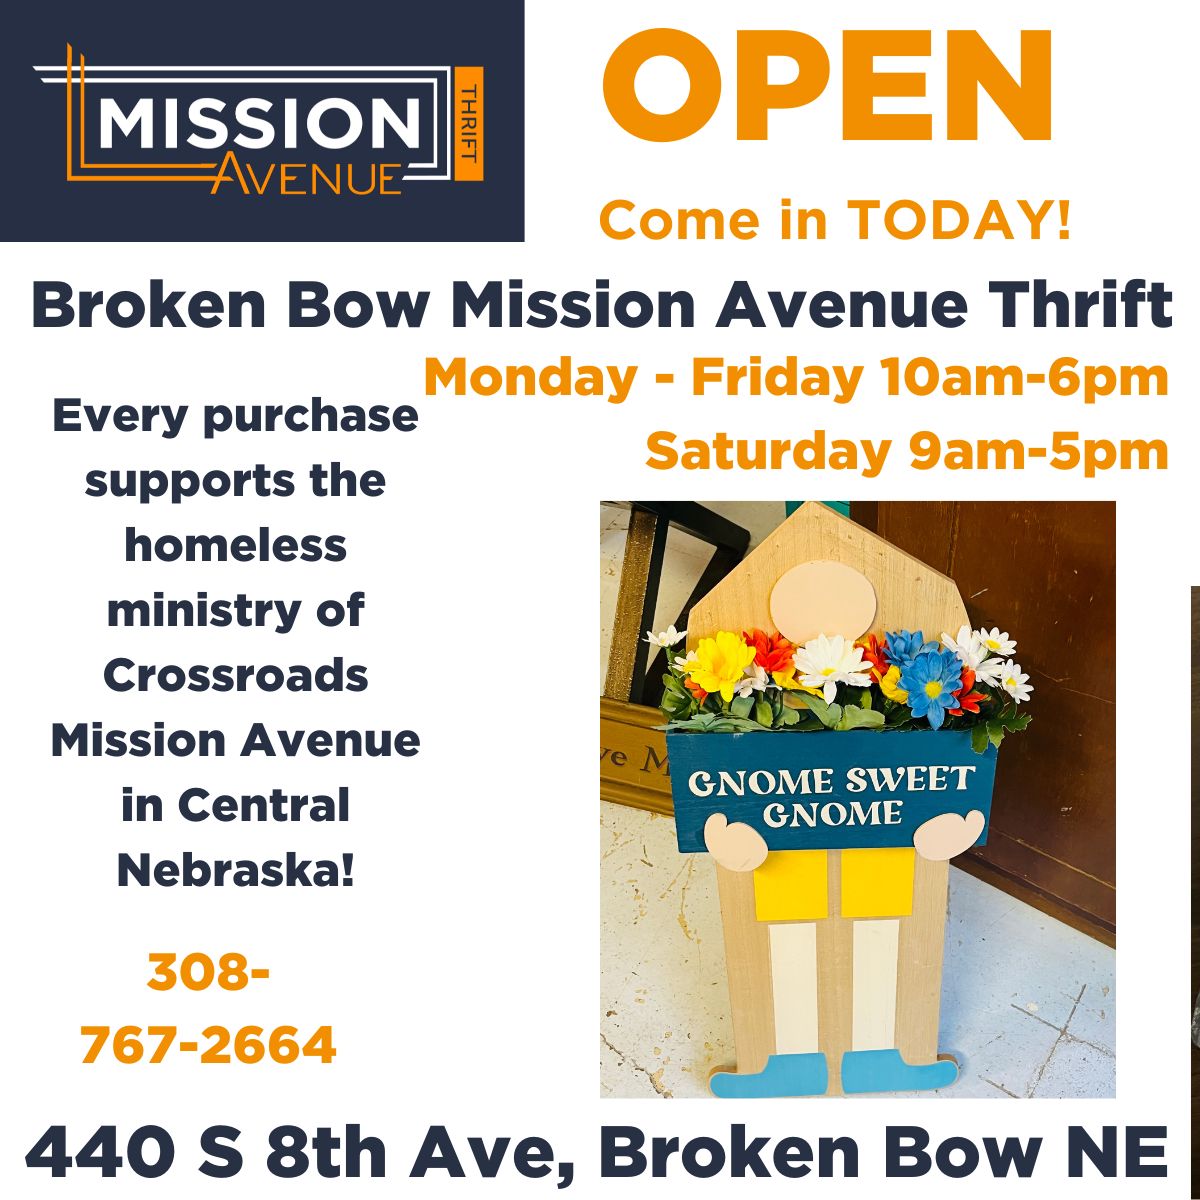 Come in TODAY and see what's NEW at Broken Bow Mission Avenue Thrift! crossroadsmission.com/thrift-stores/ #MissionAvenueThrift #BrokenBowNebraska #Thriftstore #Shoptoday